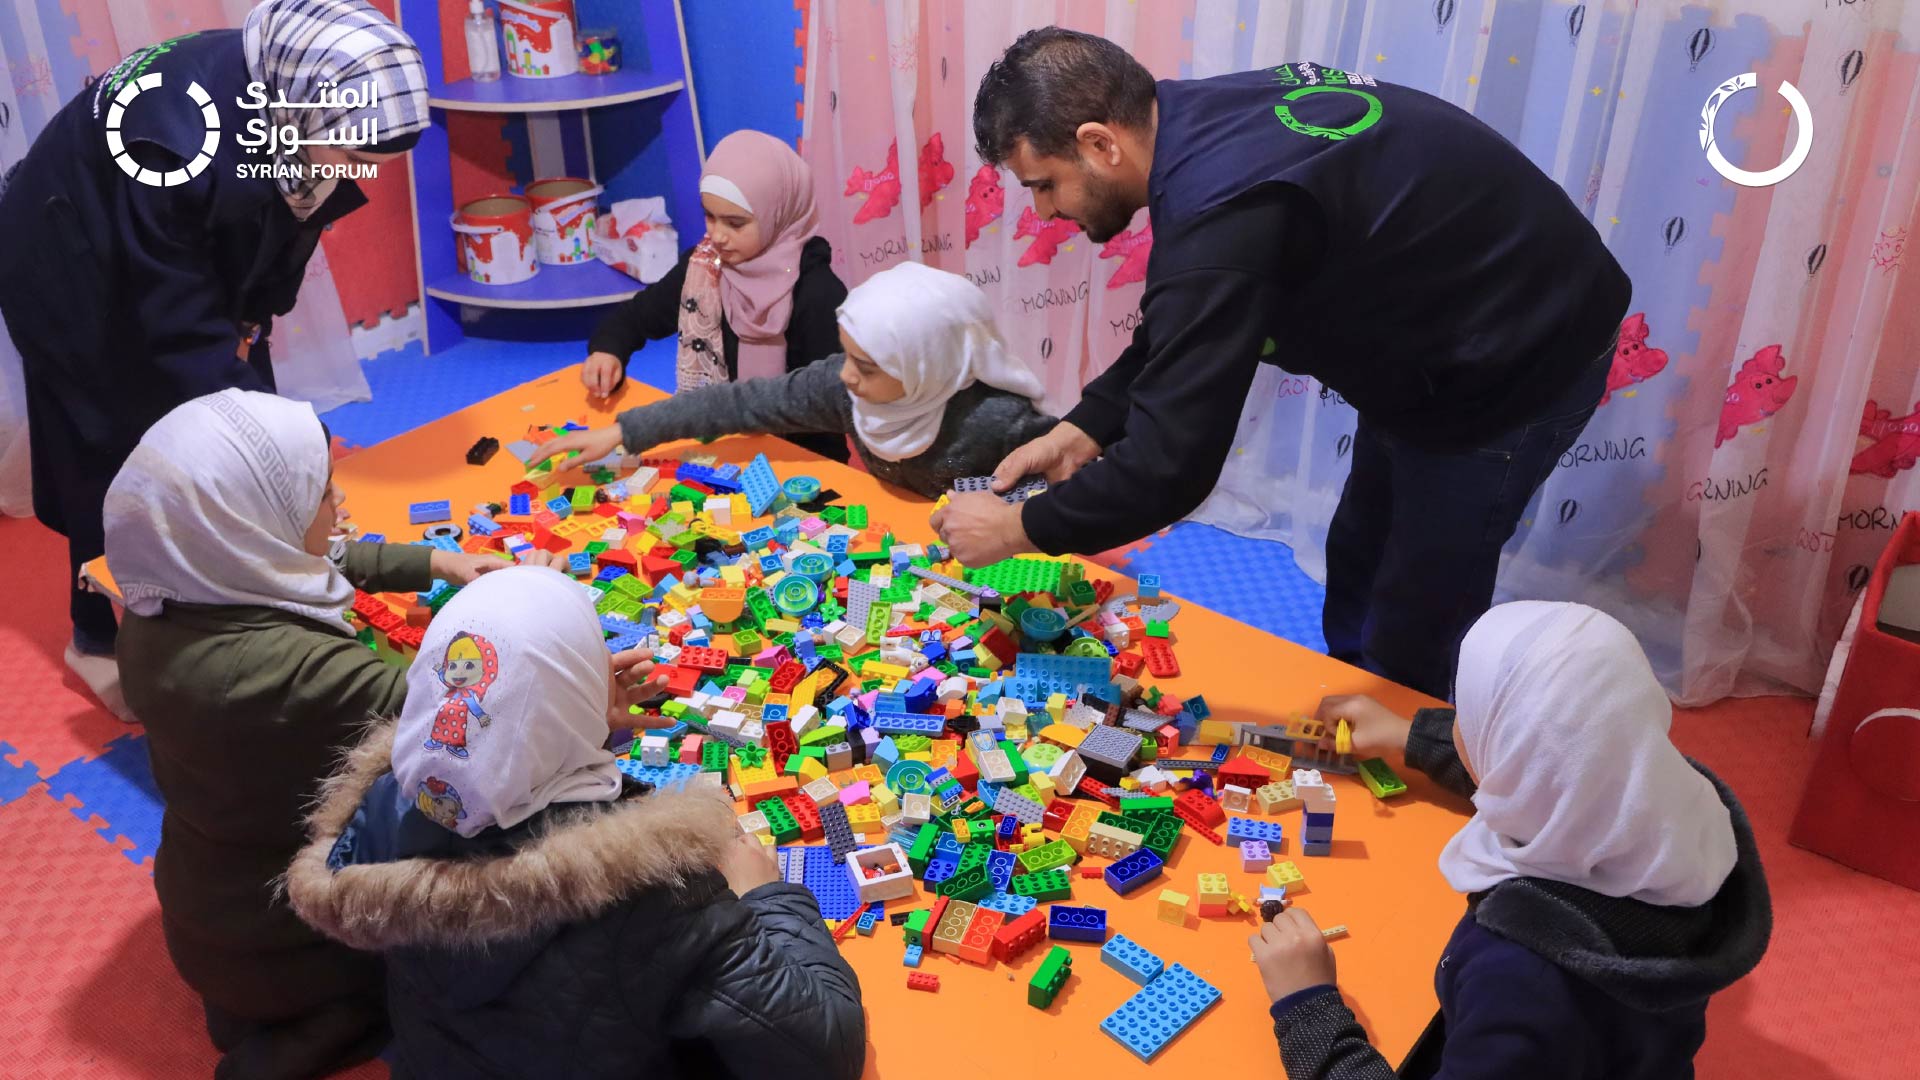 LEGO activity for young girls in Idlib